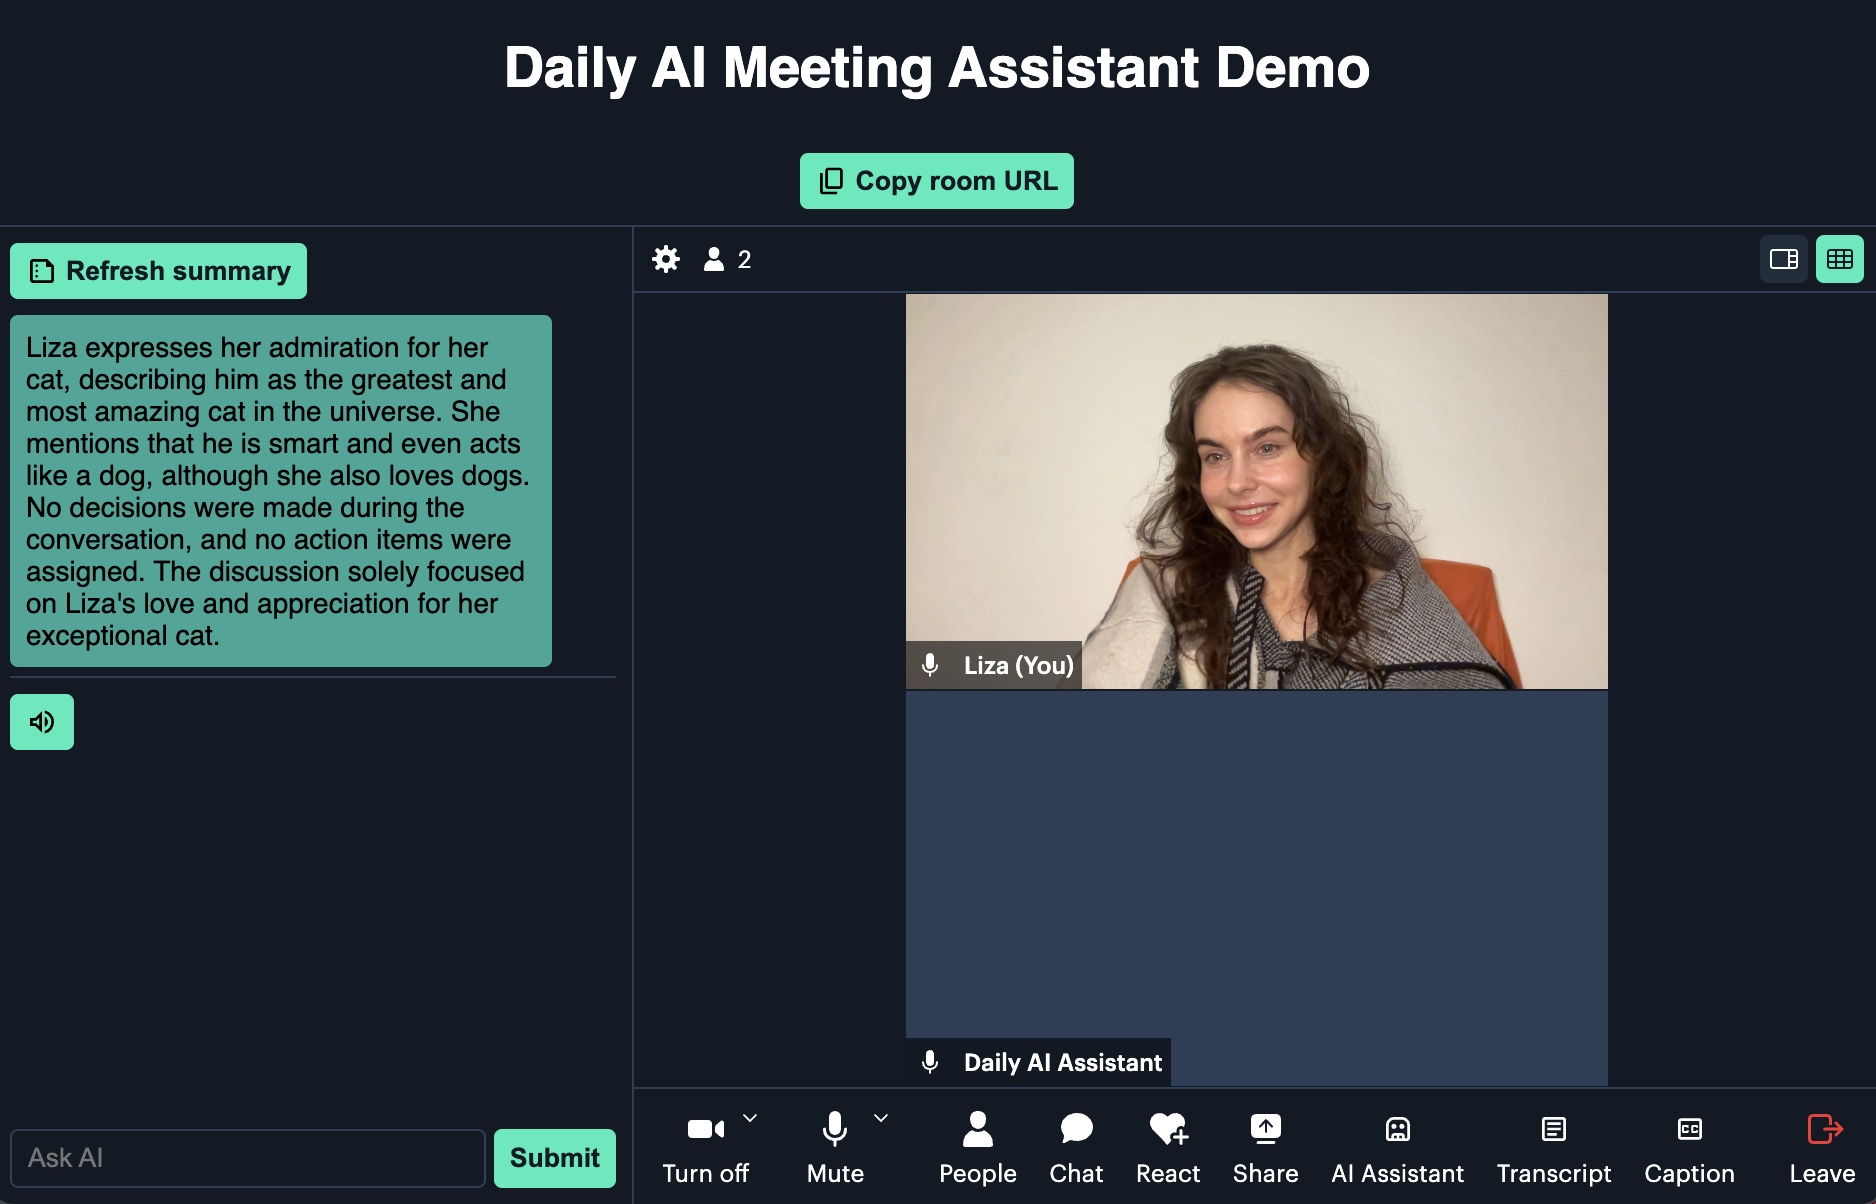 Daily AI meeting assistant displaying a meeting summary